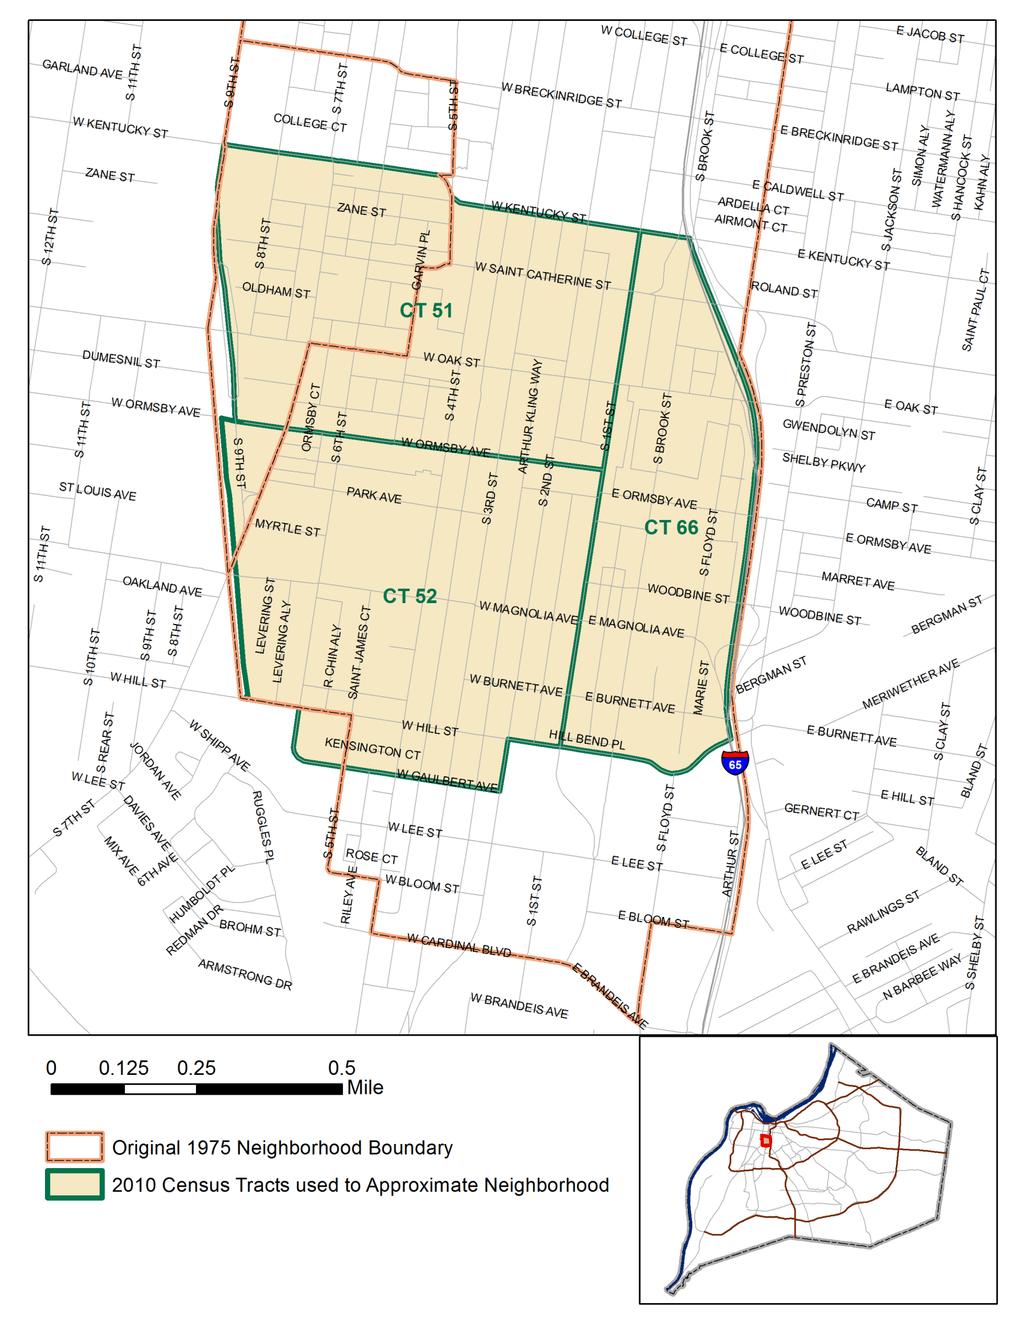 Because census tract boundaries align fairly well with the urban neighborhood boundaries, this data profile uses 2010 census tract boundaries to approximate the